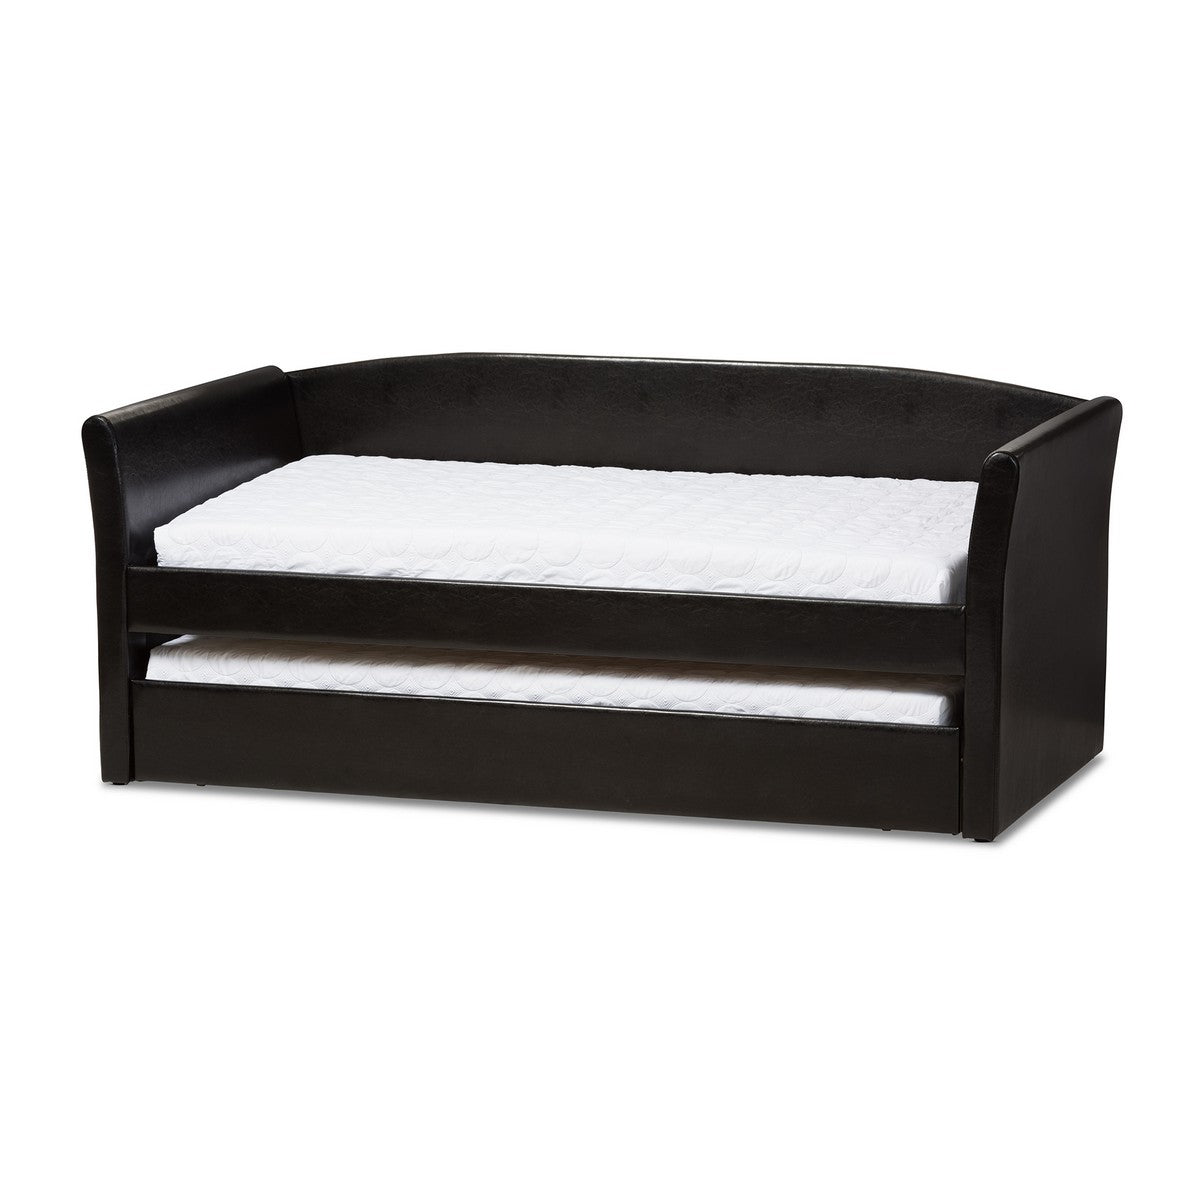 Baxton Studio Camino Modern and Contemporary Black Faux Leather Upholstered Daybed with Guest Trundle Bed Baxton Studio-daybed-Minimal And Modern - 1